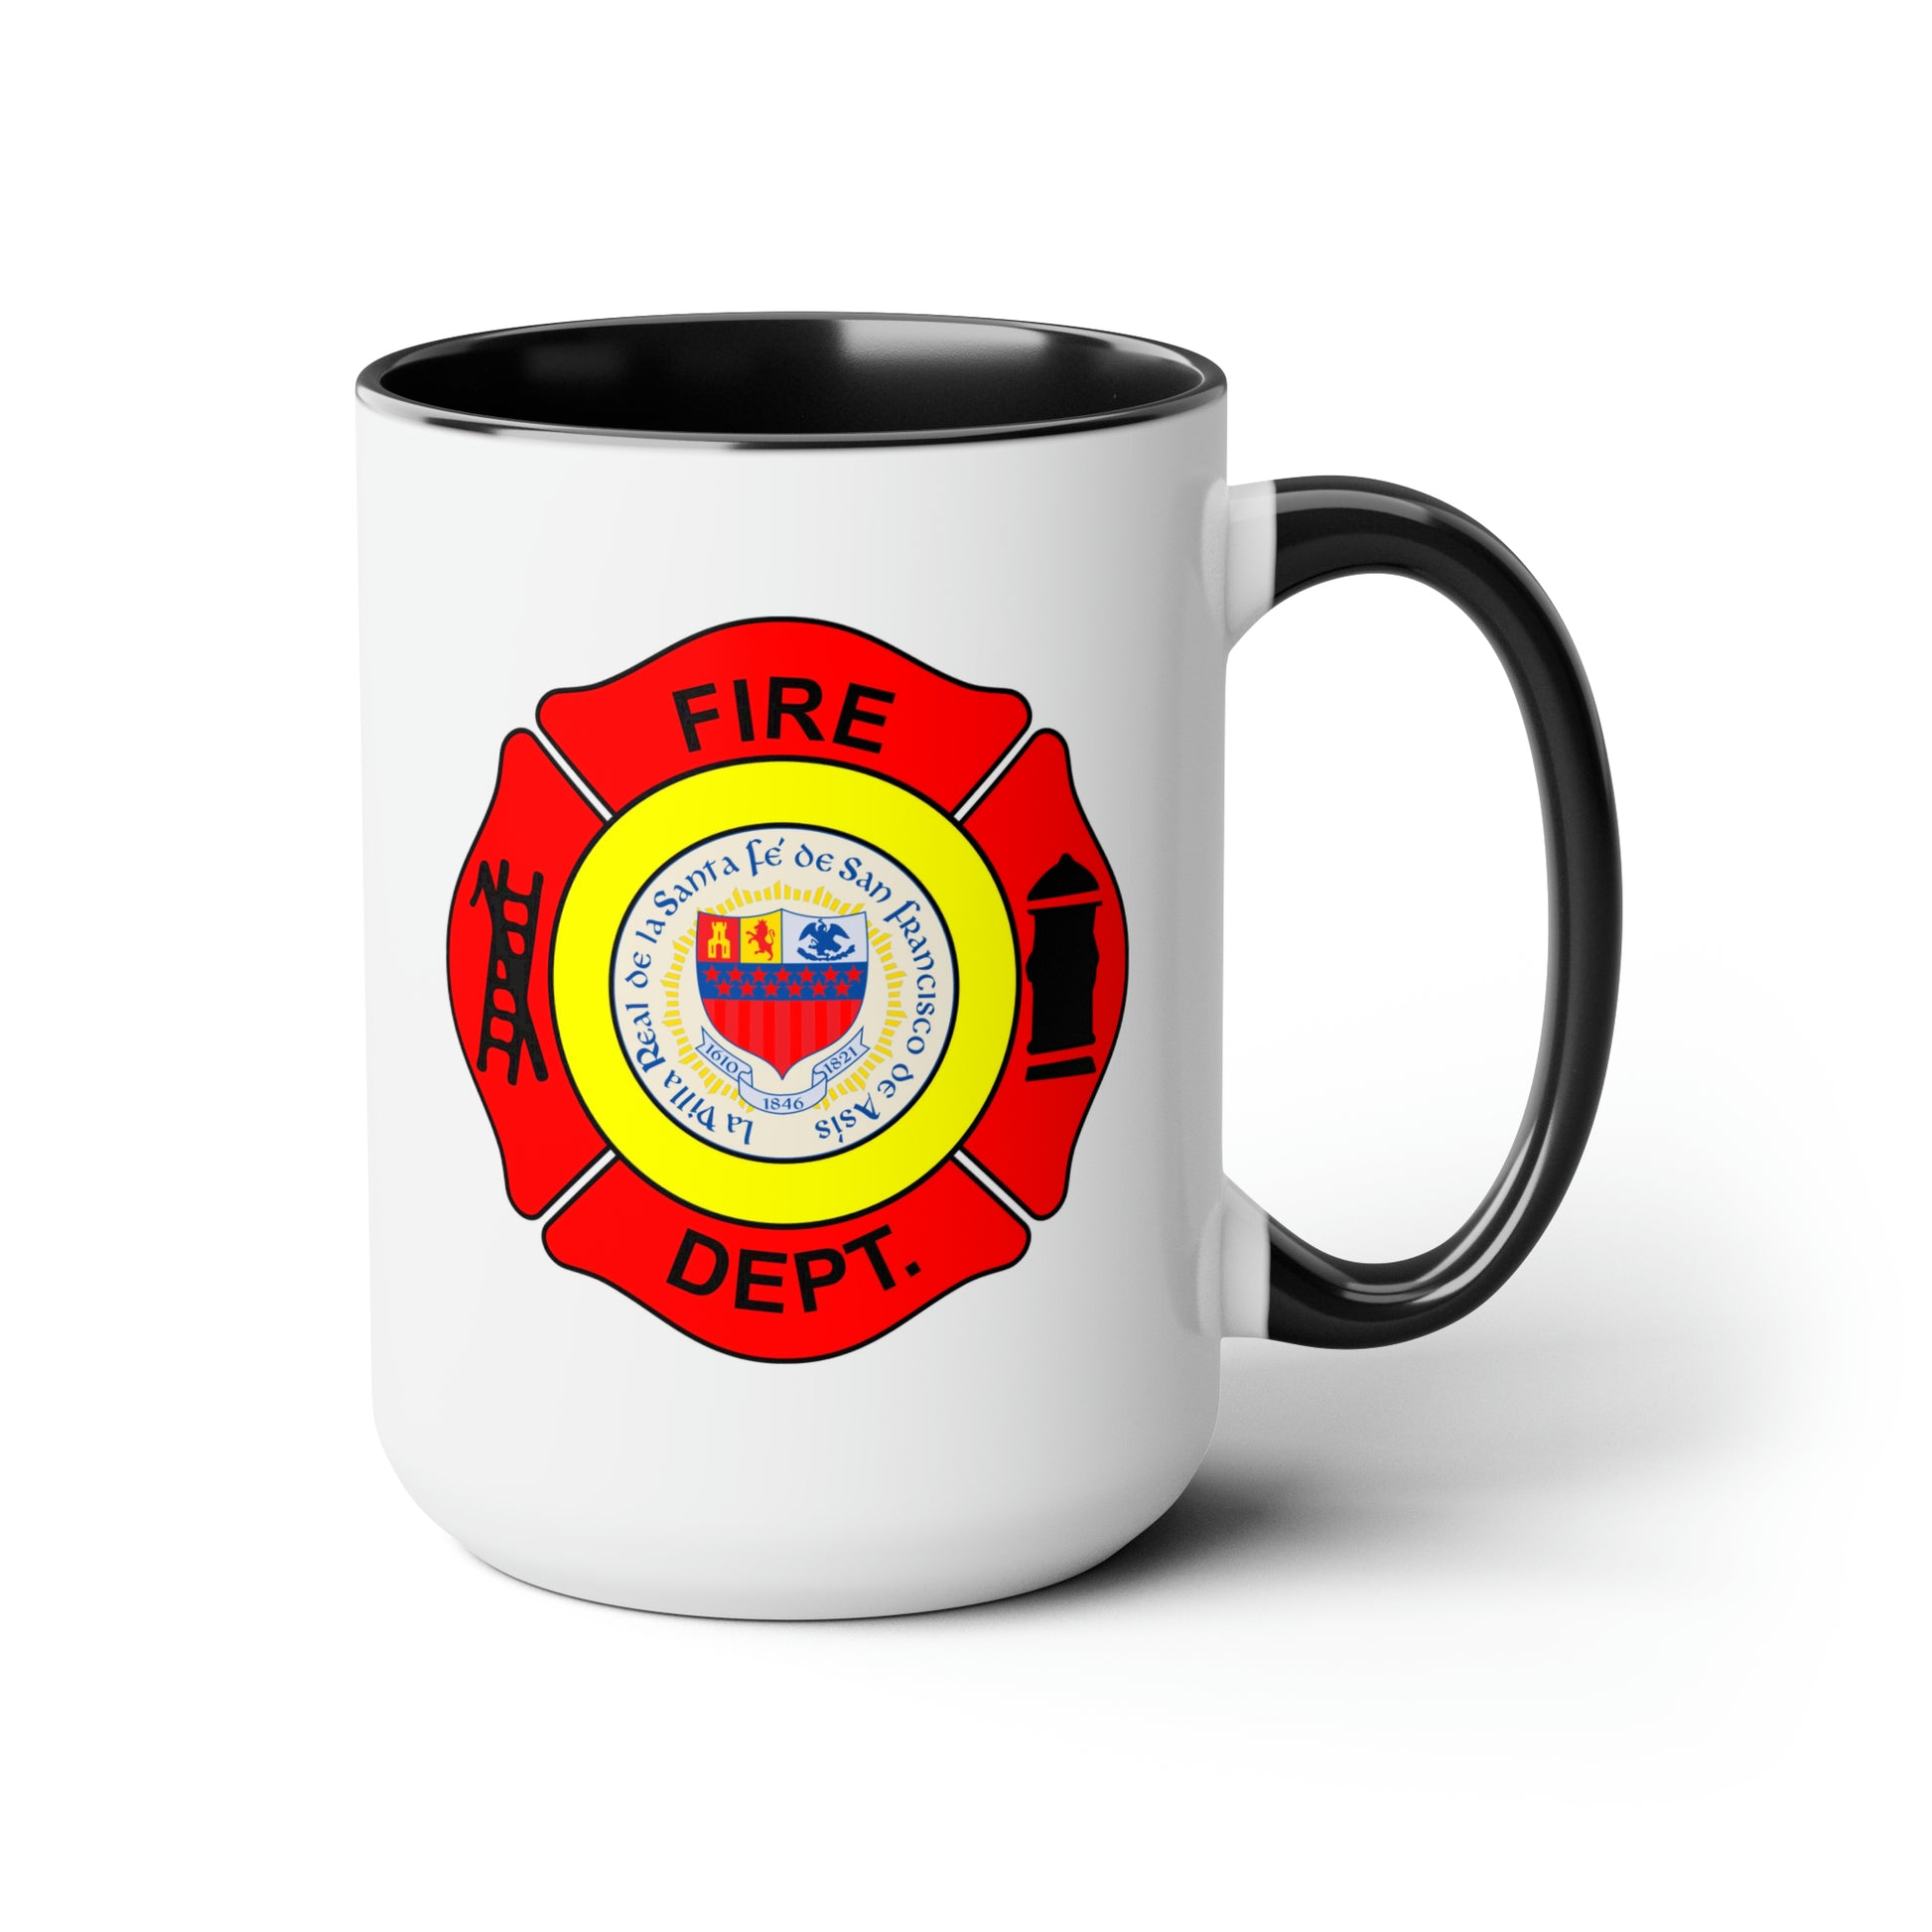 Santa Fe Fire Department Coffee Mugs - Doubles Sided Black Accent White Ceramic 15oz by TheGlassyLass.com